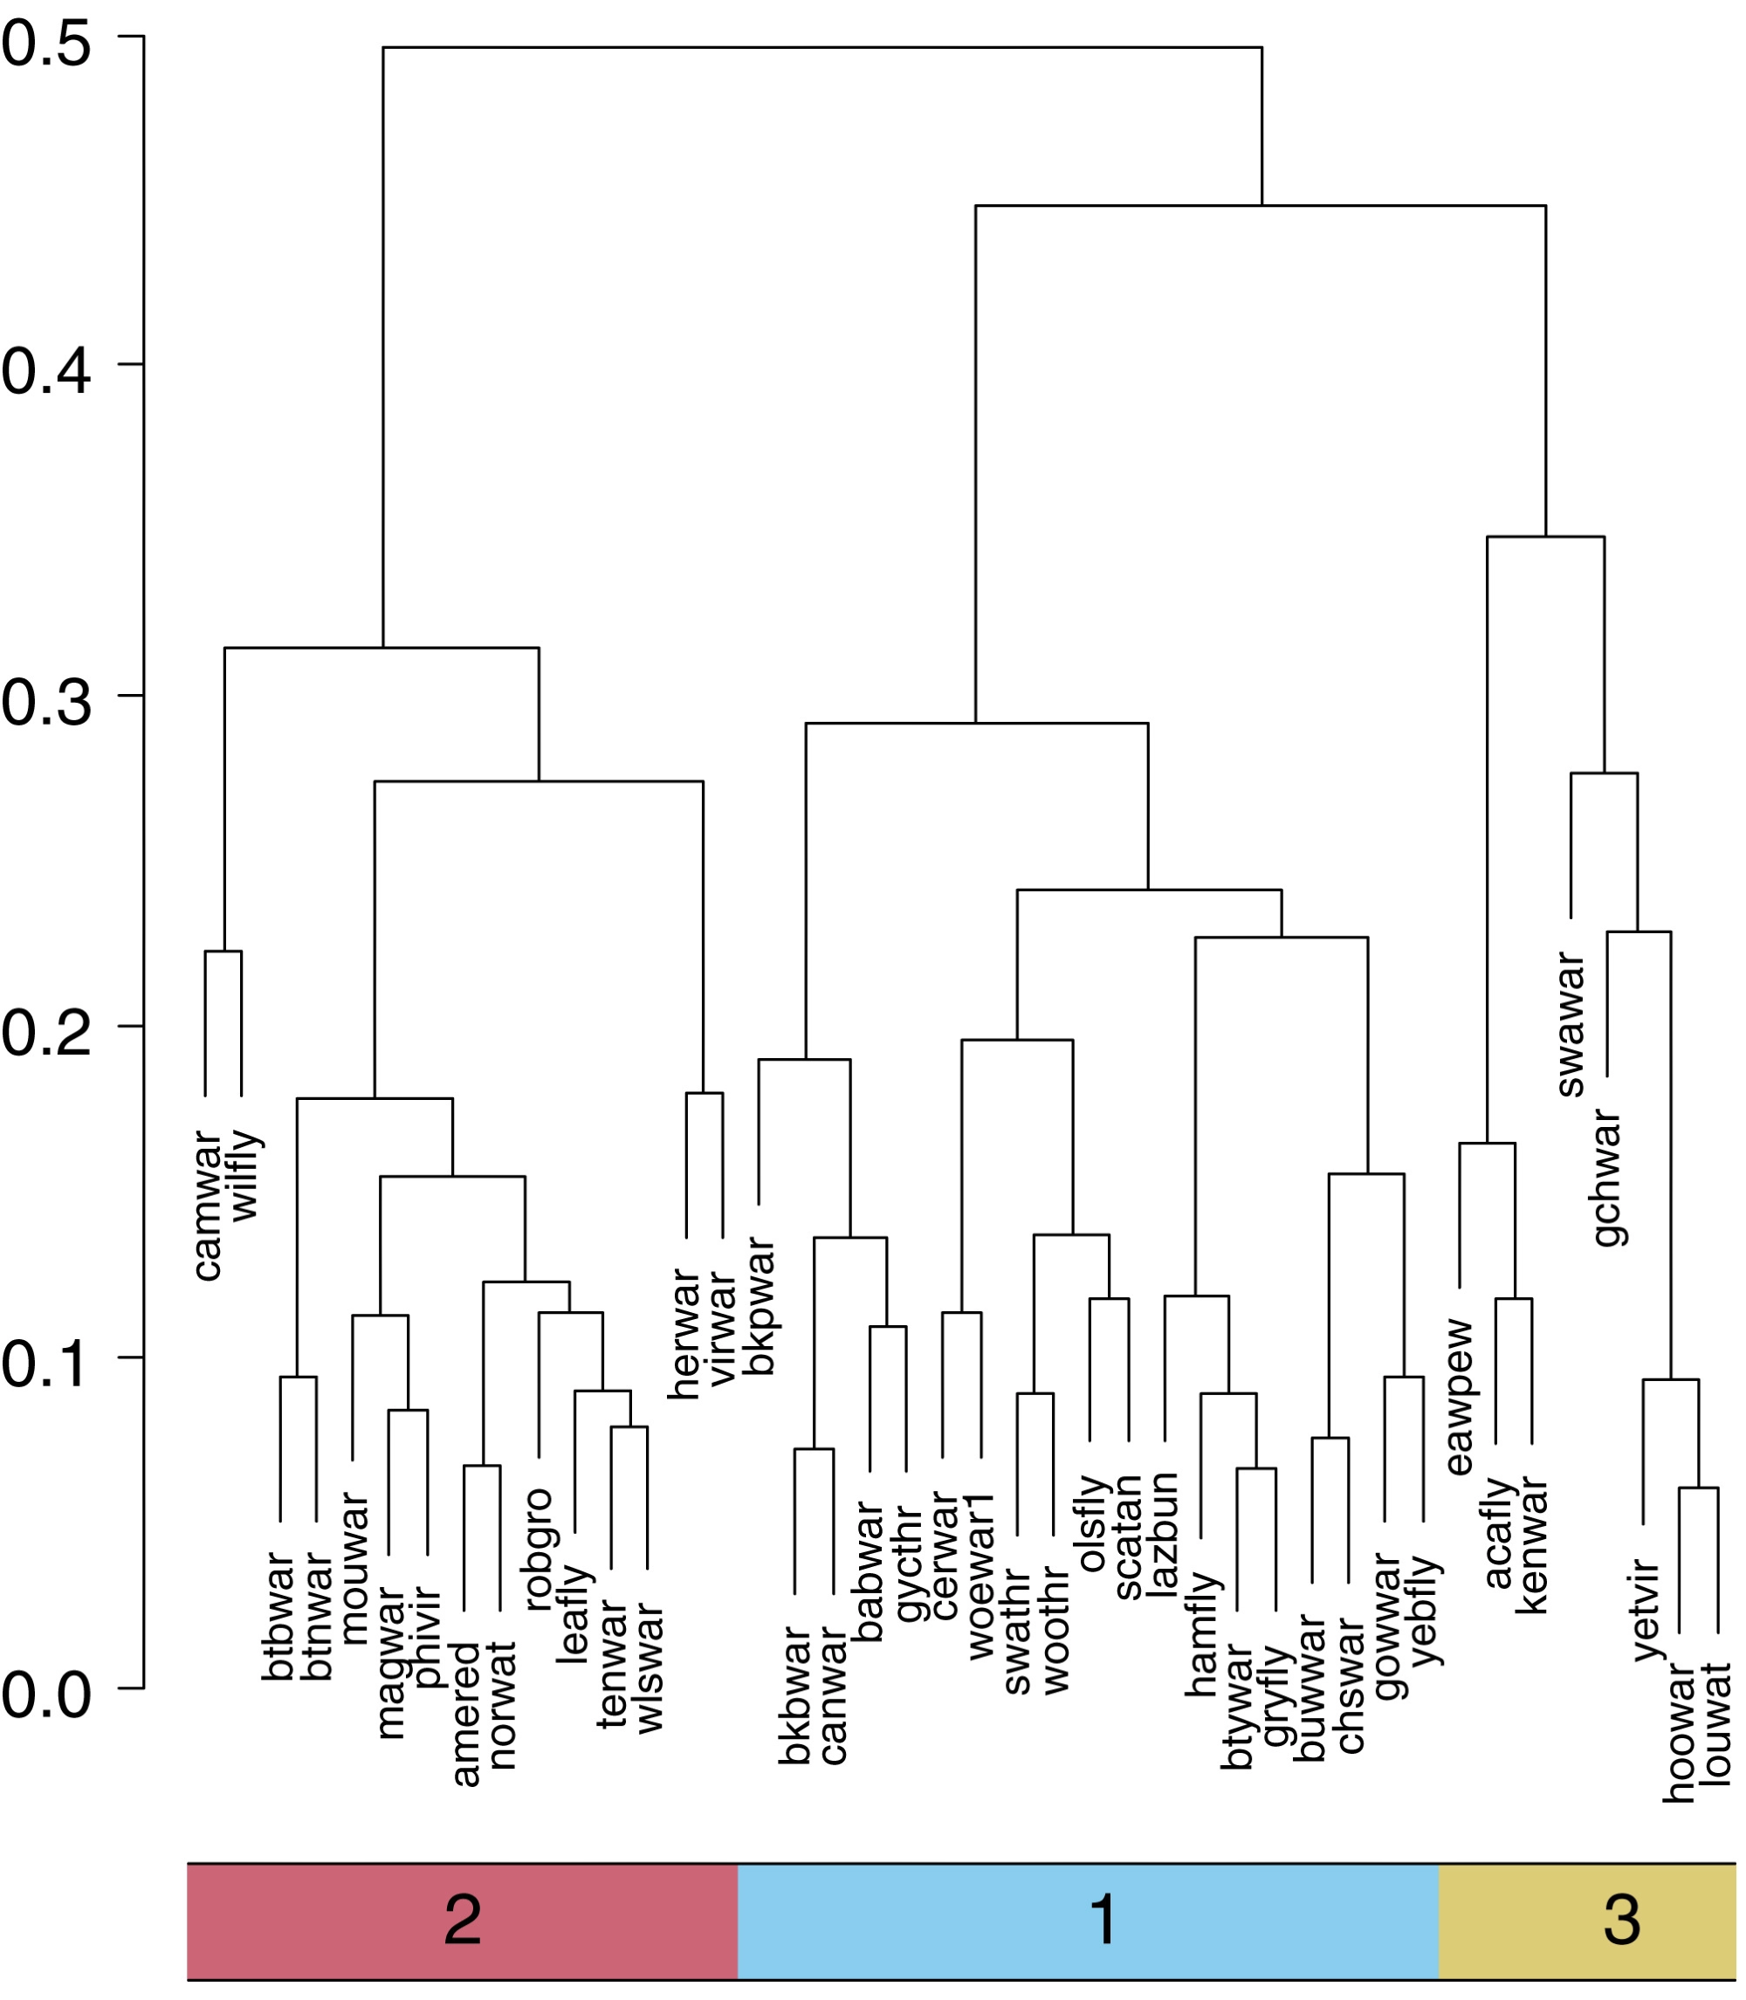 Dendrogram from a hierarchical cluster analysis of weekly associations with trends in artificial light at night for 42 nocturnally migrating passerine (NMP) bird species. The dendrogram labels are the common name alpha codes for the 42 NMP species. The colored annotations below the dendrogram identify species grouped into three clusters using an adaptive branch pruning technique.